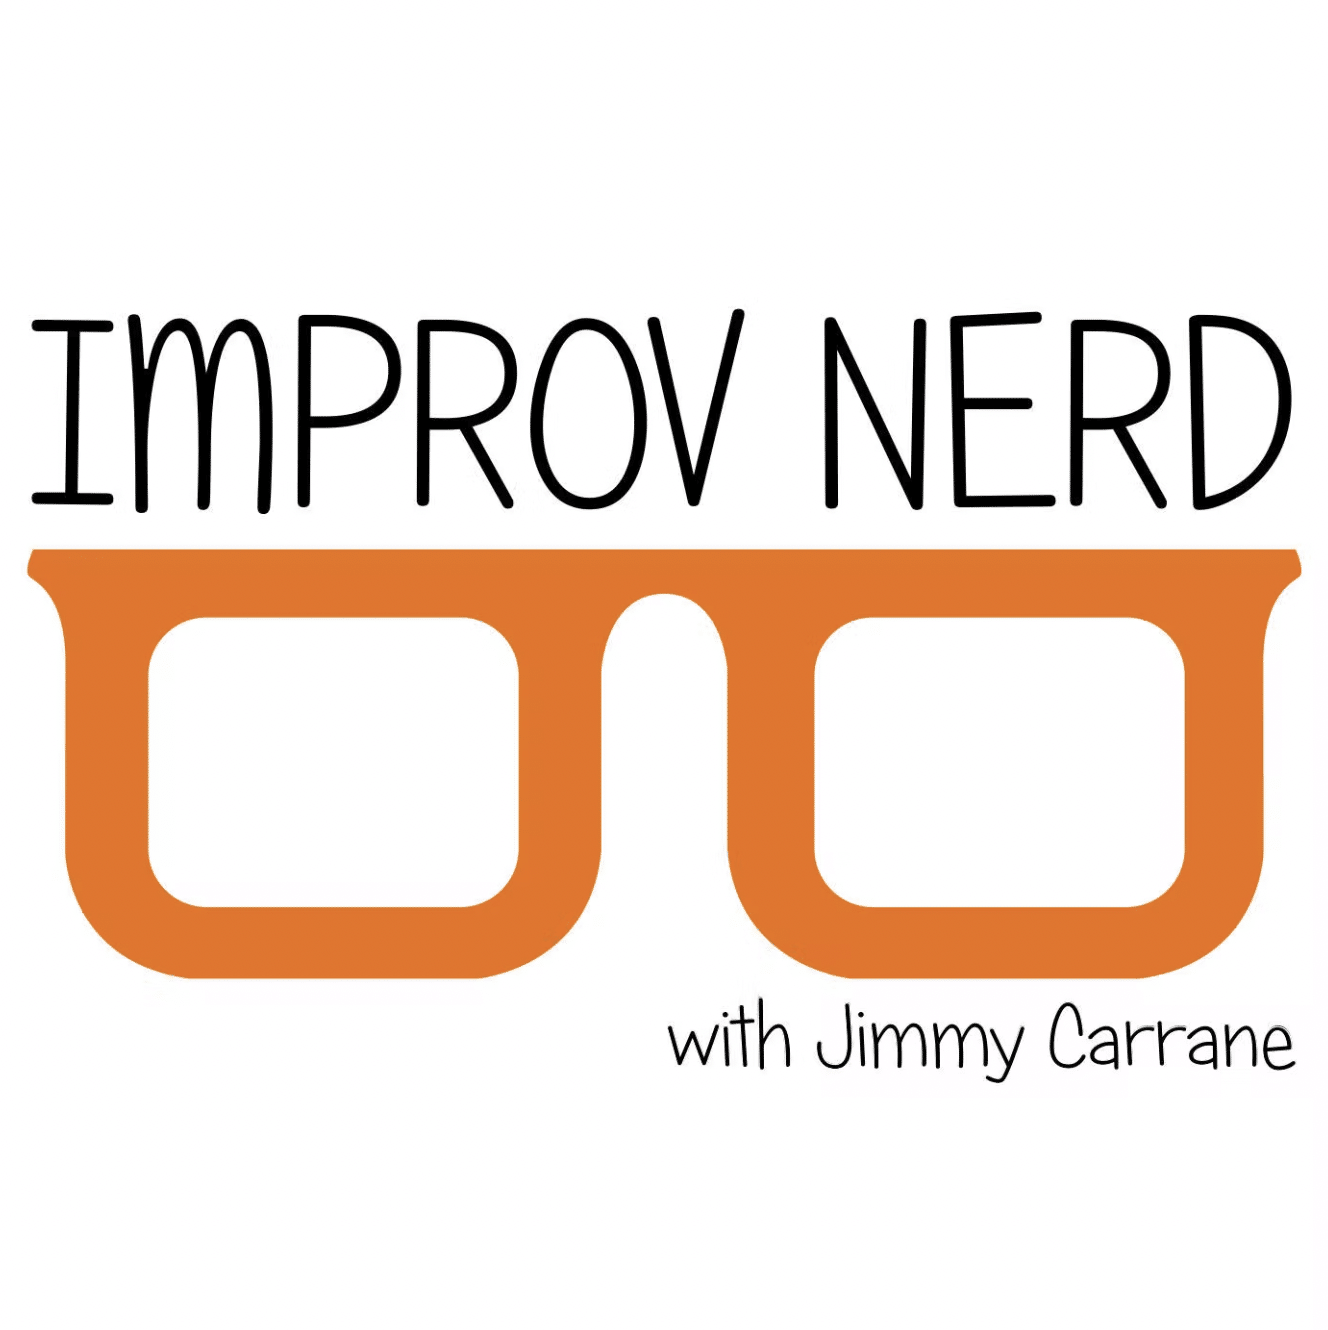 Logo for Improv Nerd featuring glasses and title text